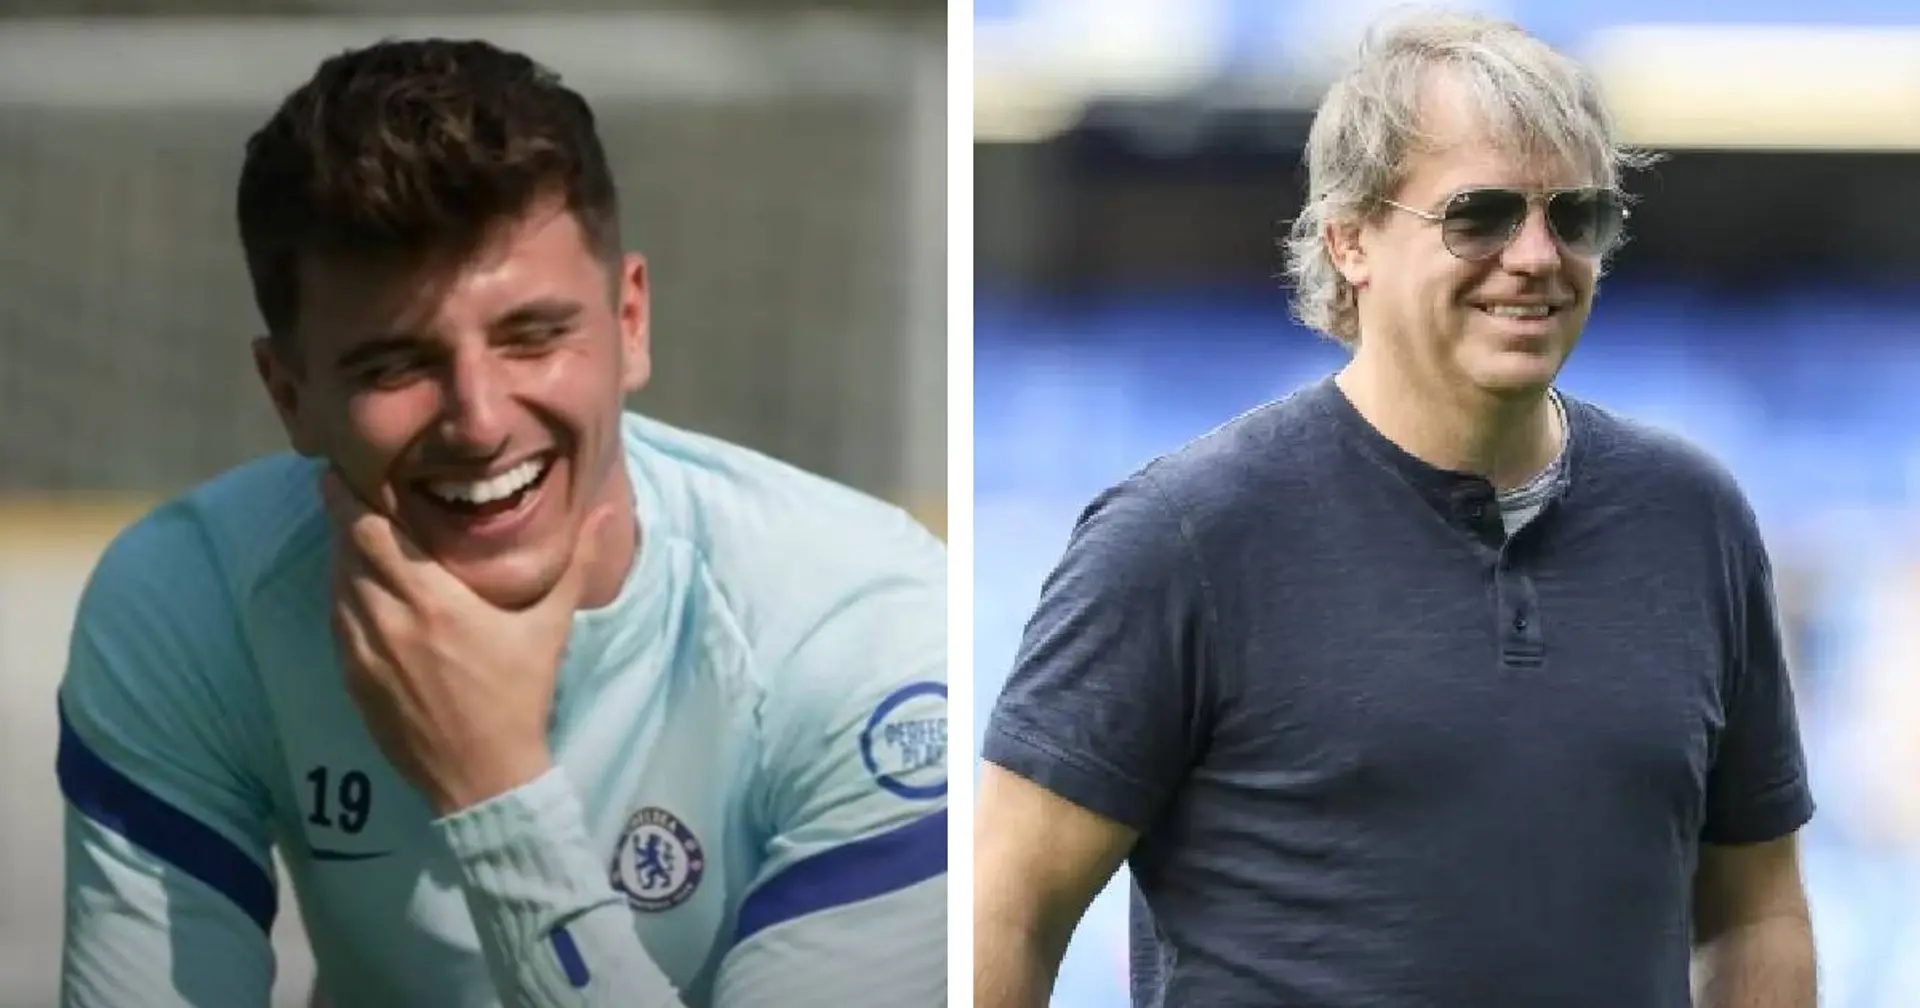 'I can't wait to see what happens': Mount excited for Chelsea's 'new era'